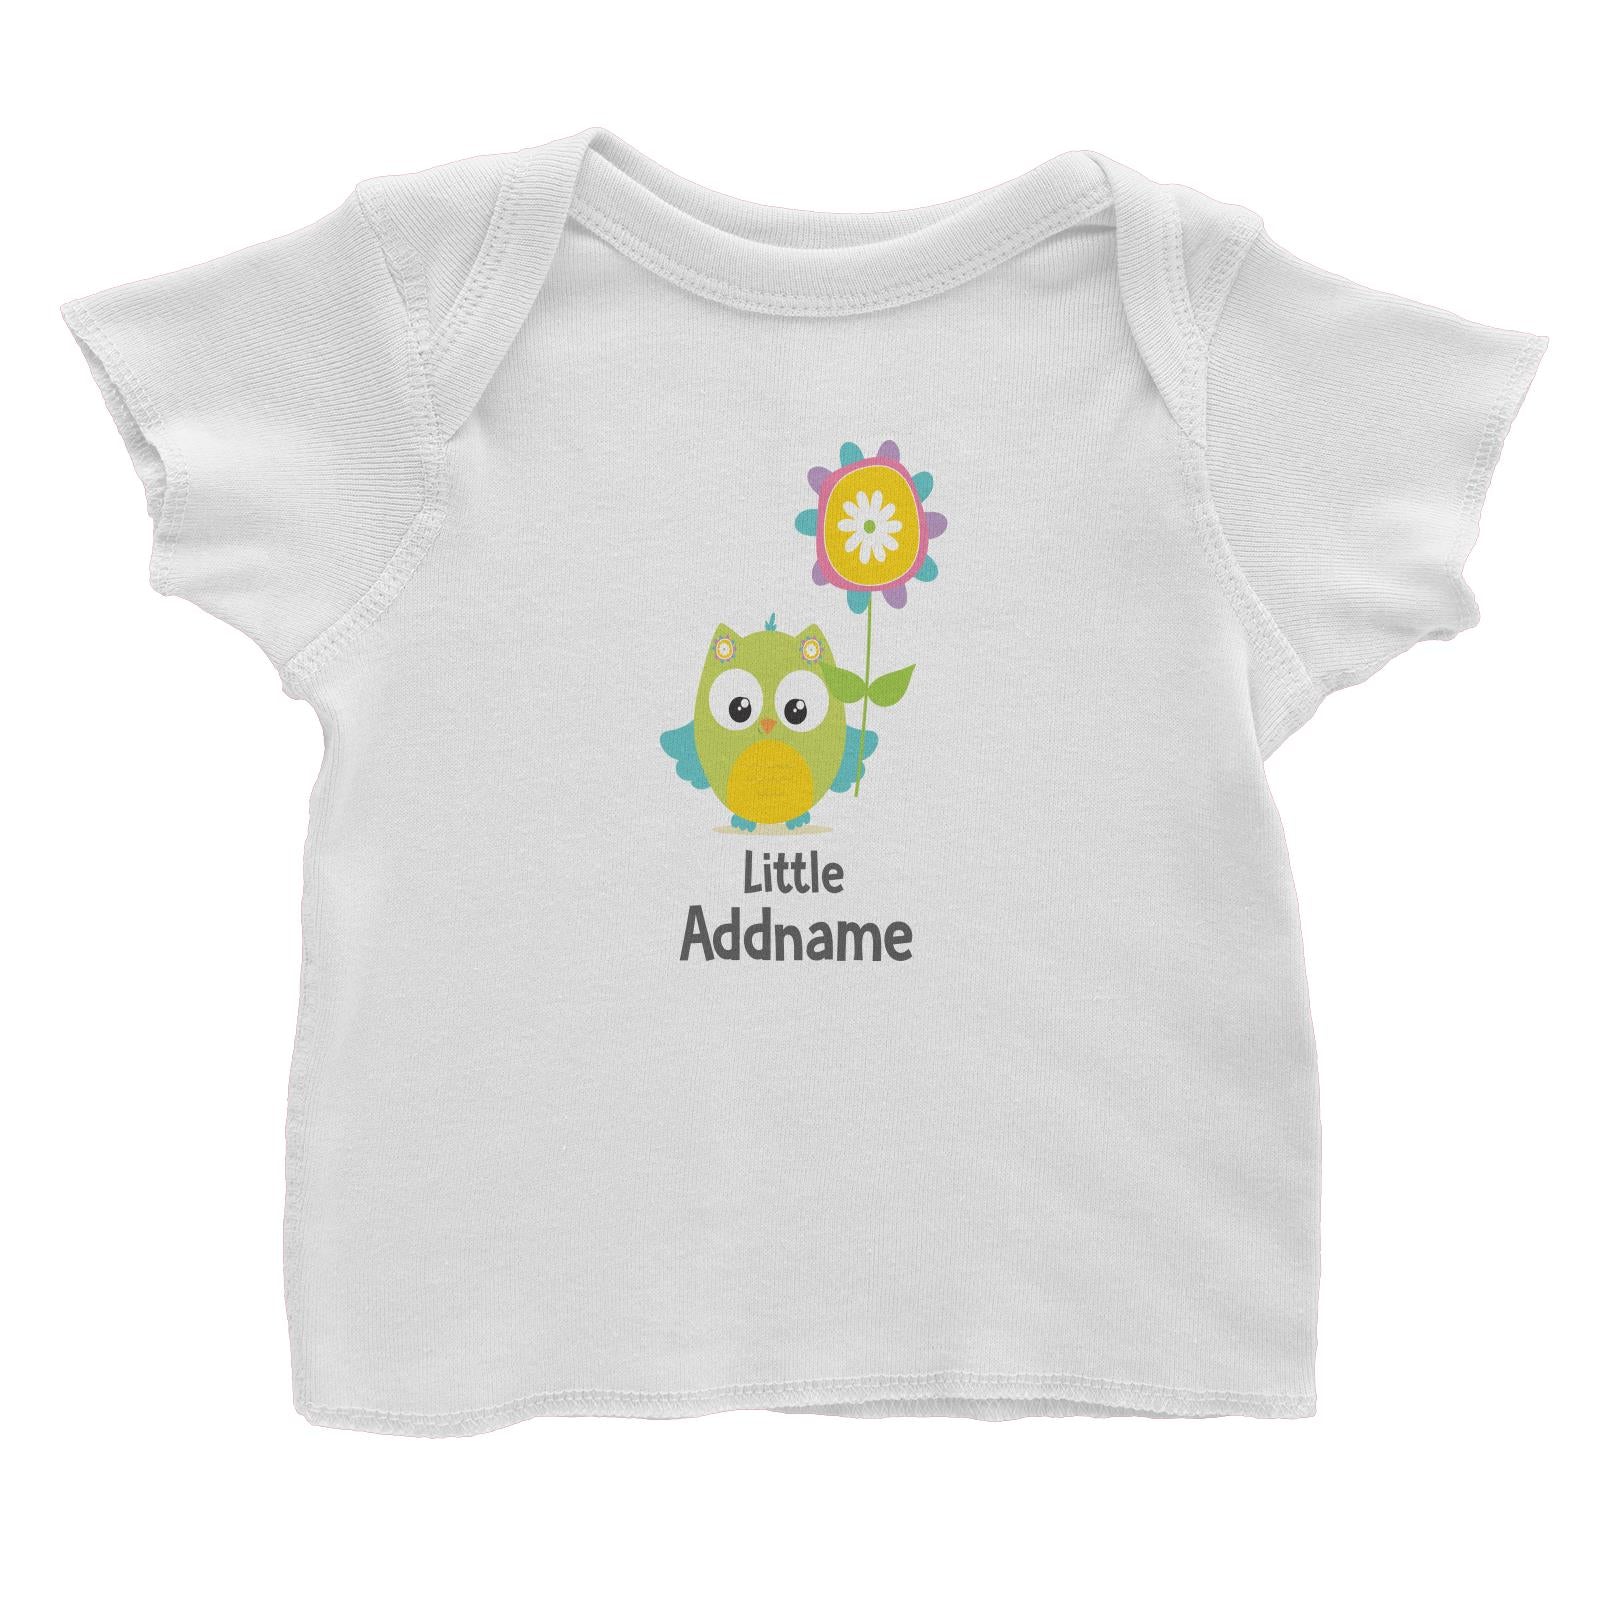 Cute Owls Green with Flower Little Addname Baby T-Shirt